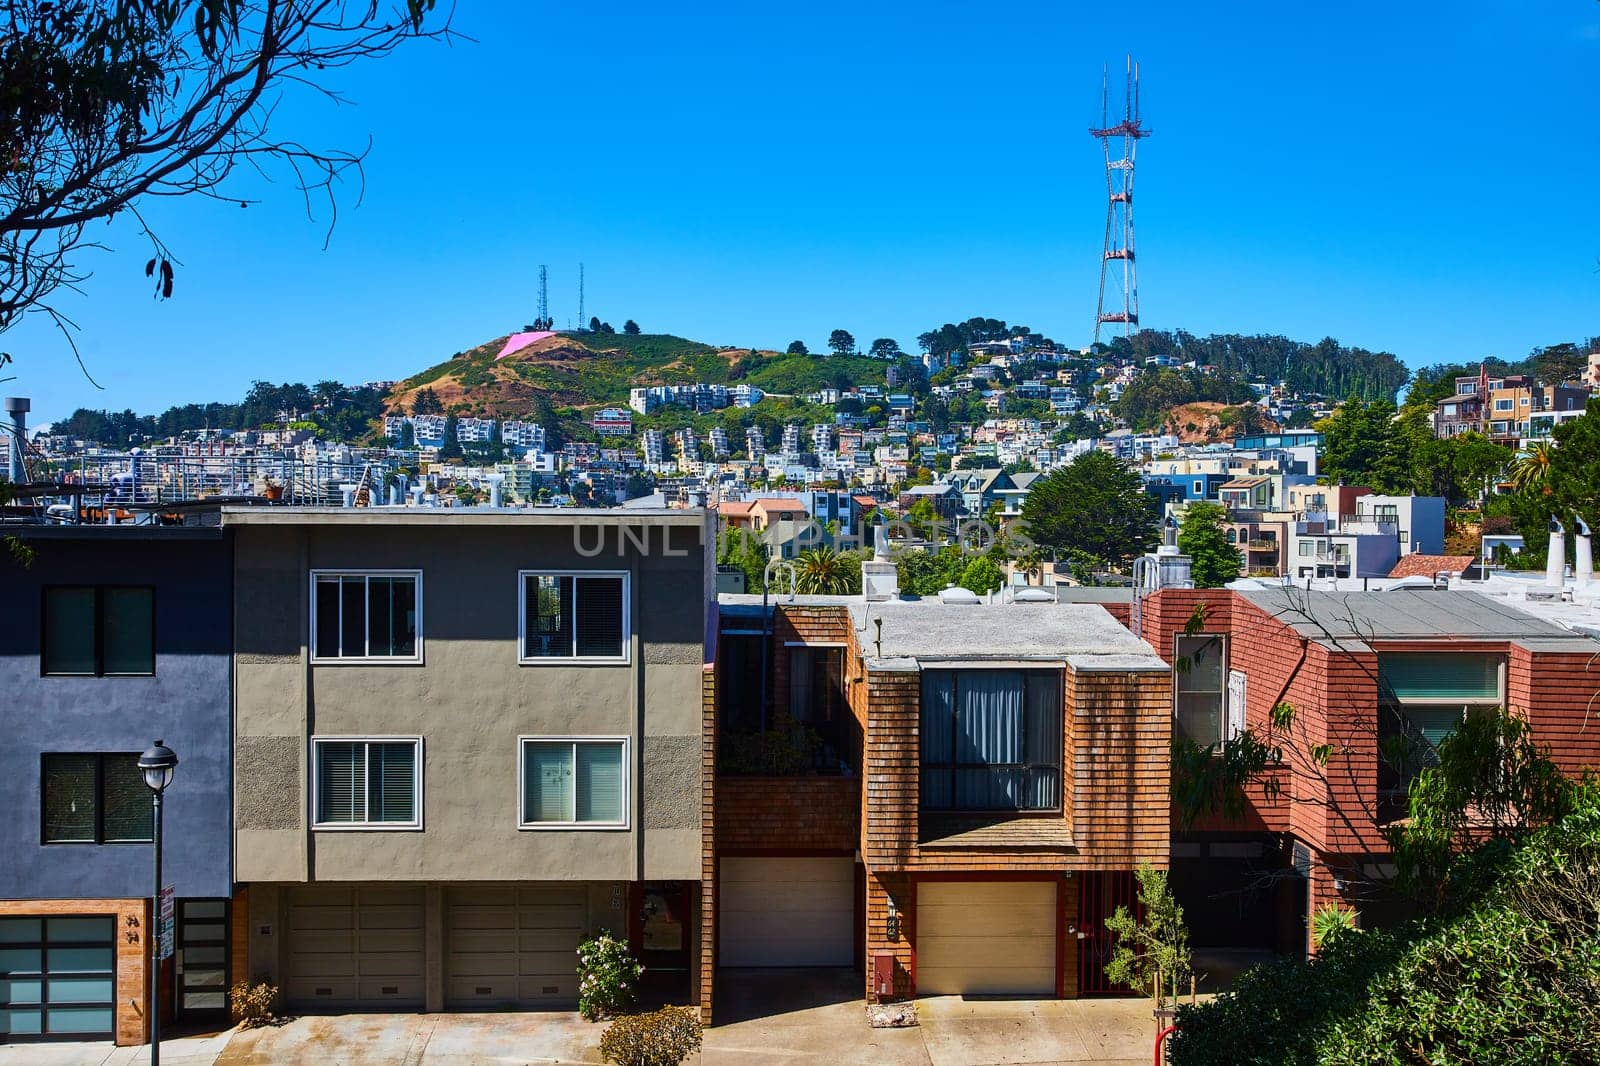 Image of Sutro Tower up on hill on blue sky day with houses down below on hillside